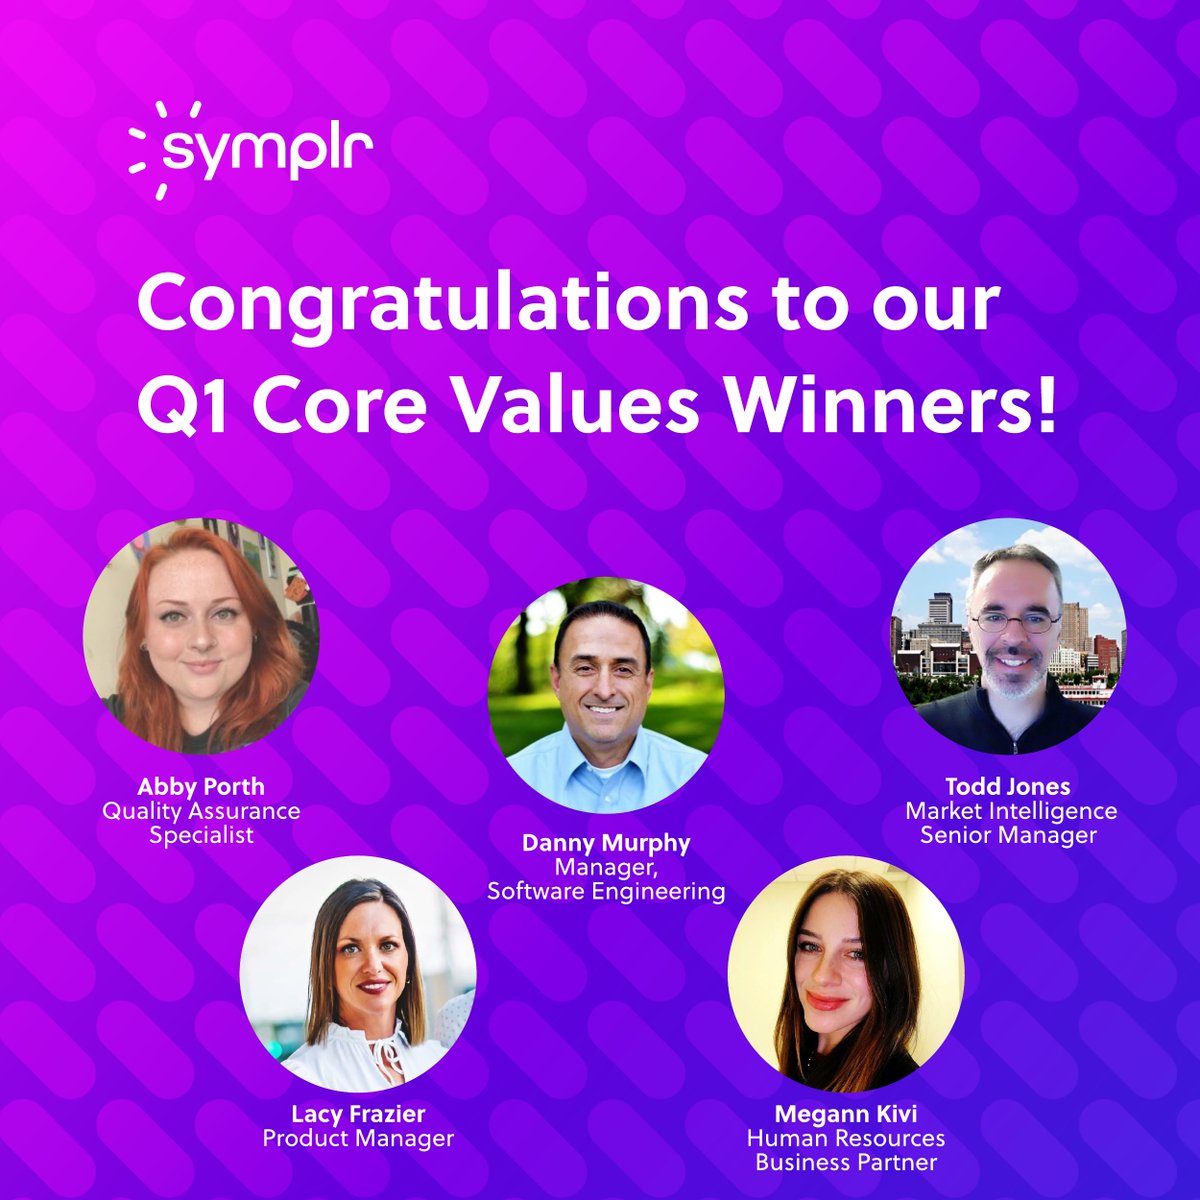 Celebrating our Q1 Core Values Award winners! 🌟 Abby Porth: Teamwork is Our True North 🌟 Lacy Frazier: Relentlessly Champion the Customer 🌟 Megann Kivi: Lead Through Equality & Integrity 🌟 Danny Murphy: Forge the Path 🌟 Todd Jones: Rooted in Action & Outcomes